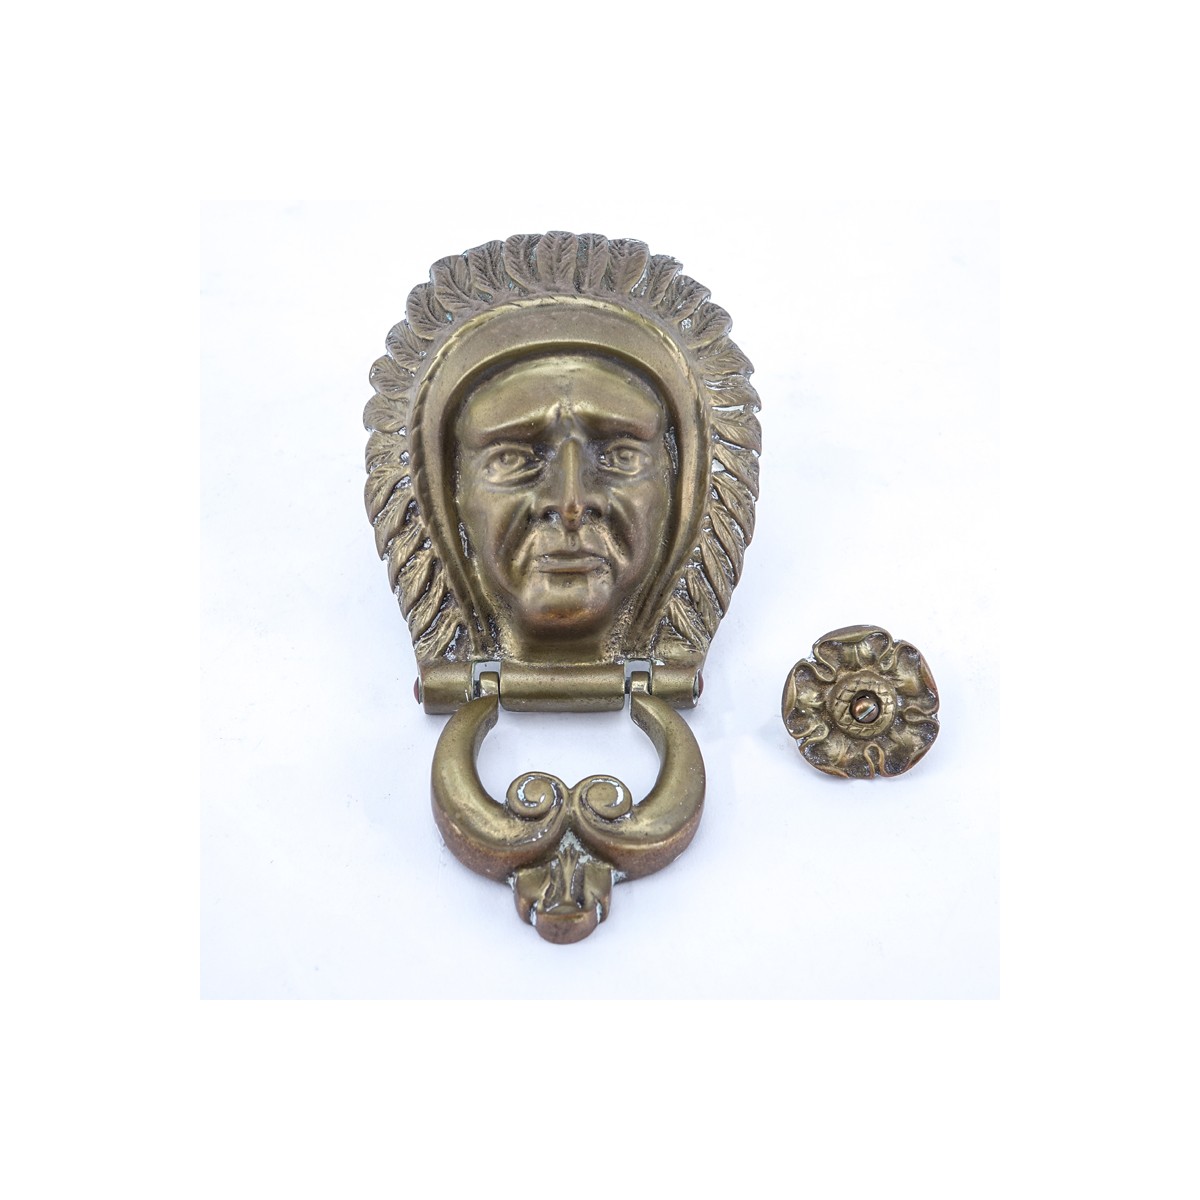 Antique American Indian Brass Door Knocker With Strike Plate. Marked REG NO 927861. Good condition.